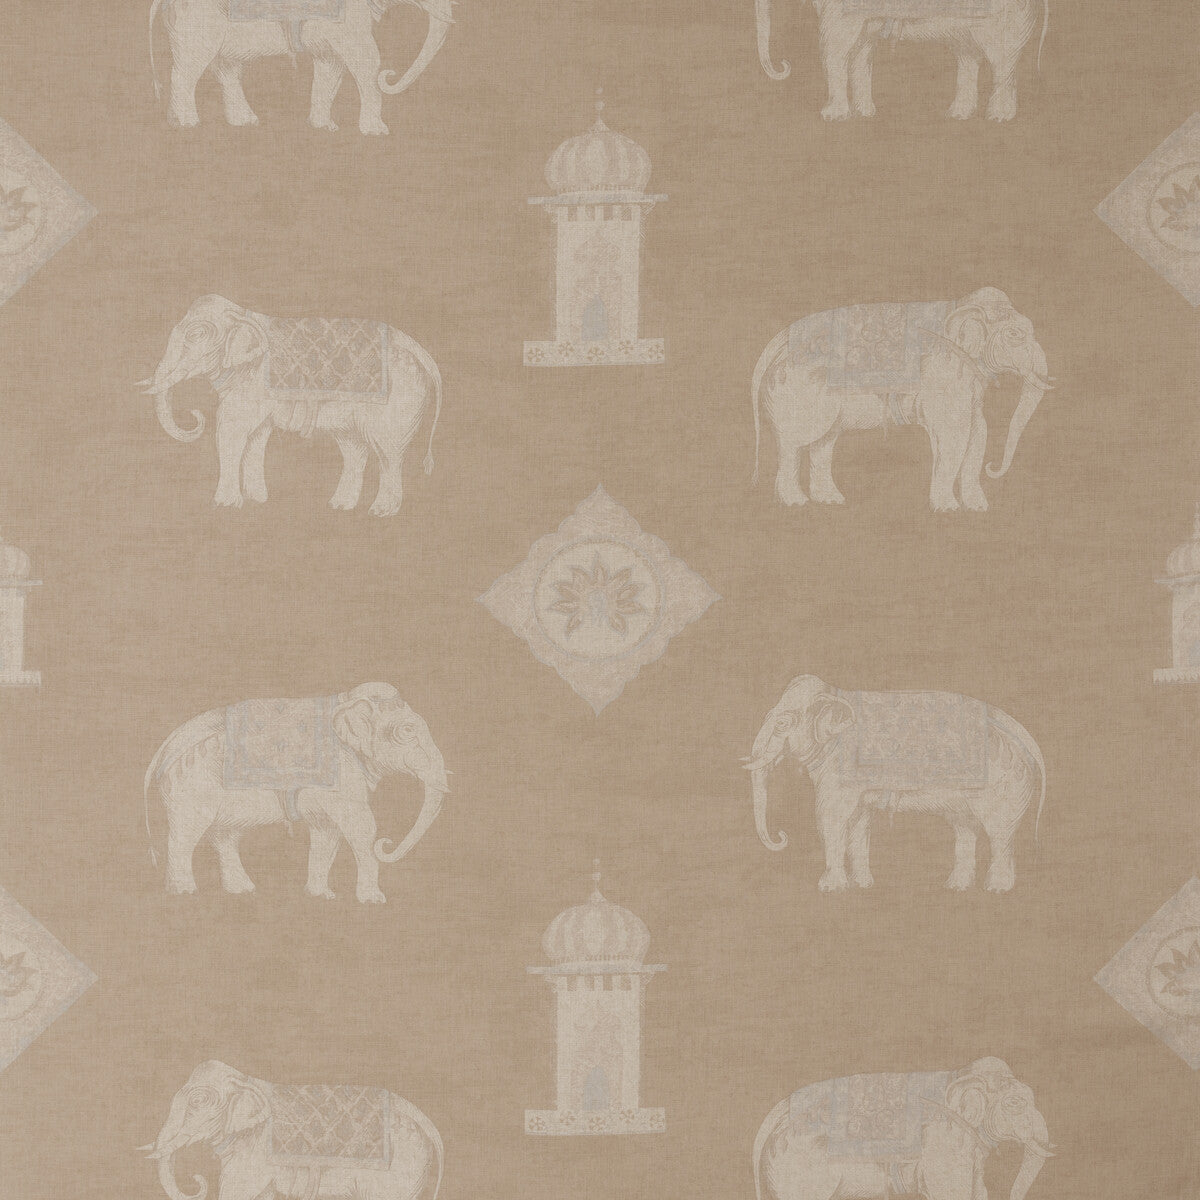 Jumbo fabric in plaster color - pattern AM100315.17.0 - by Kravet Couture in the Andrew Martin Gobi collection